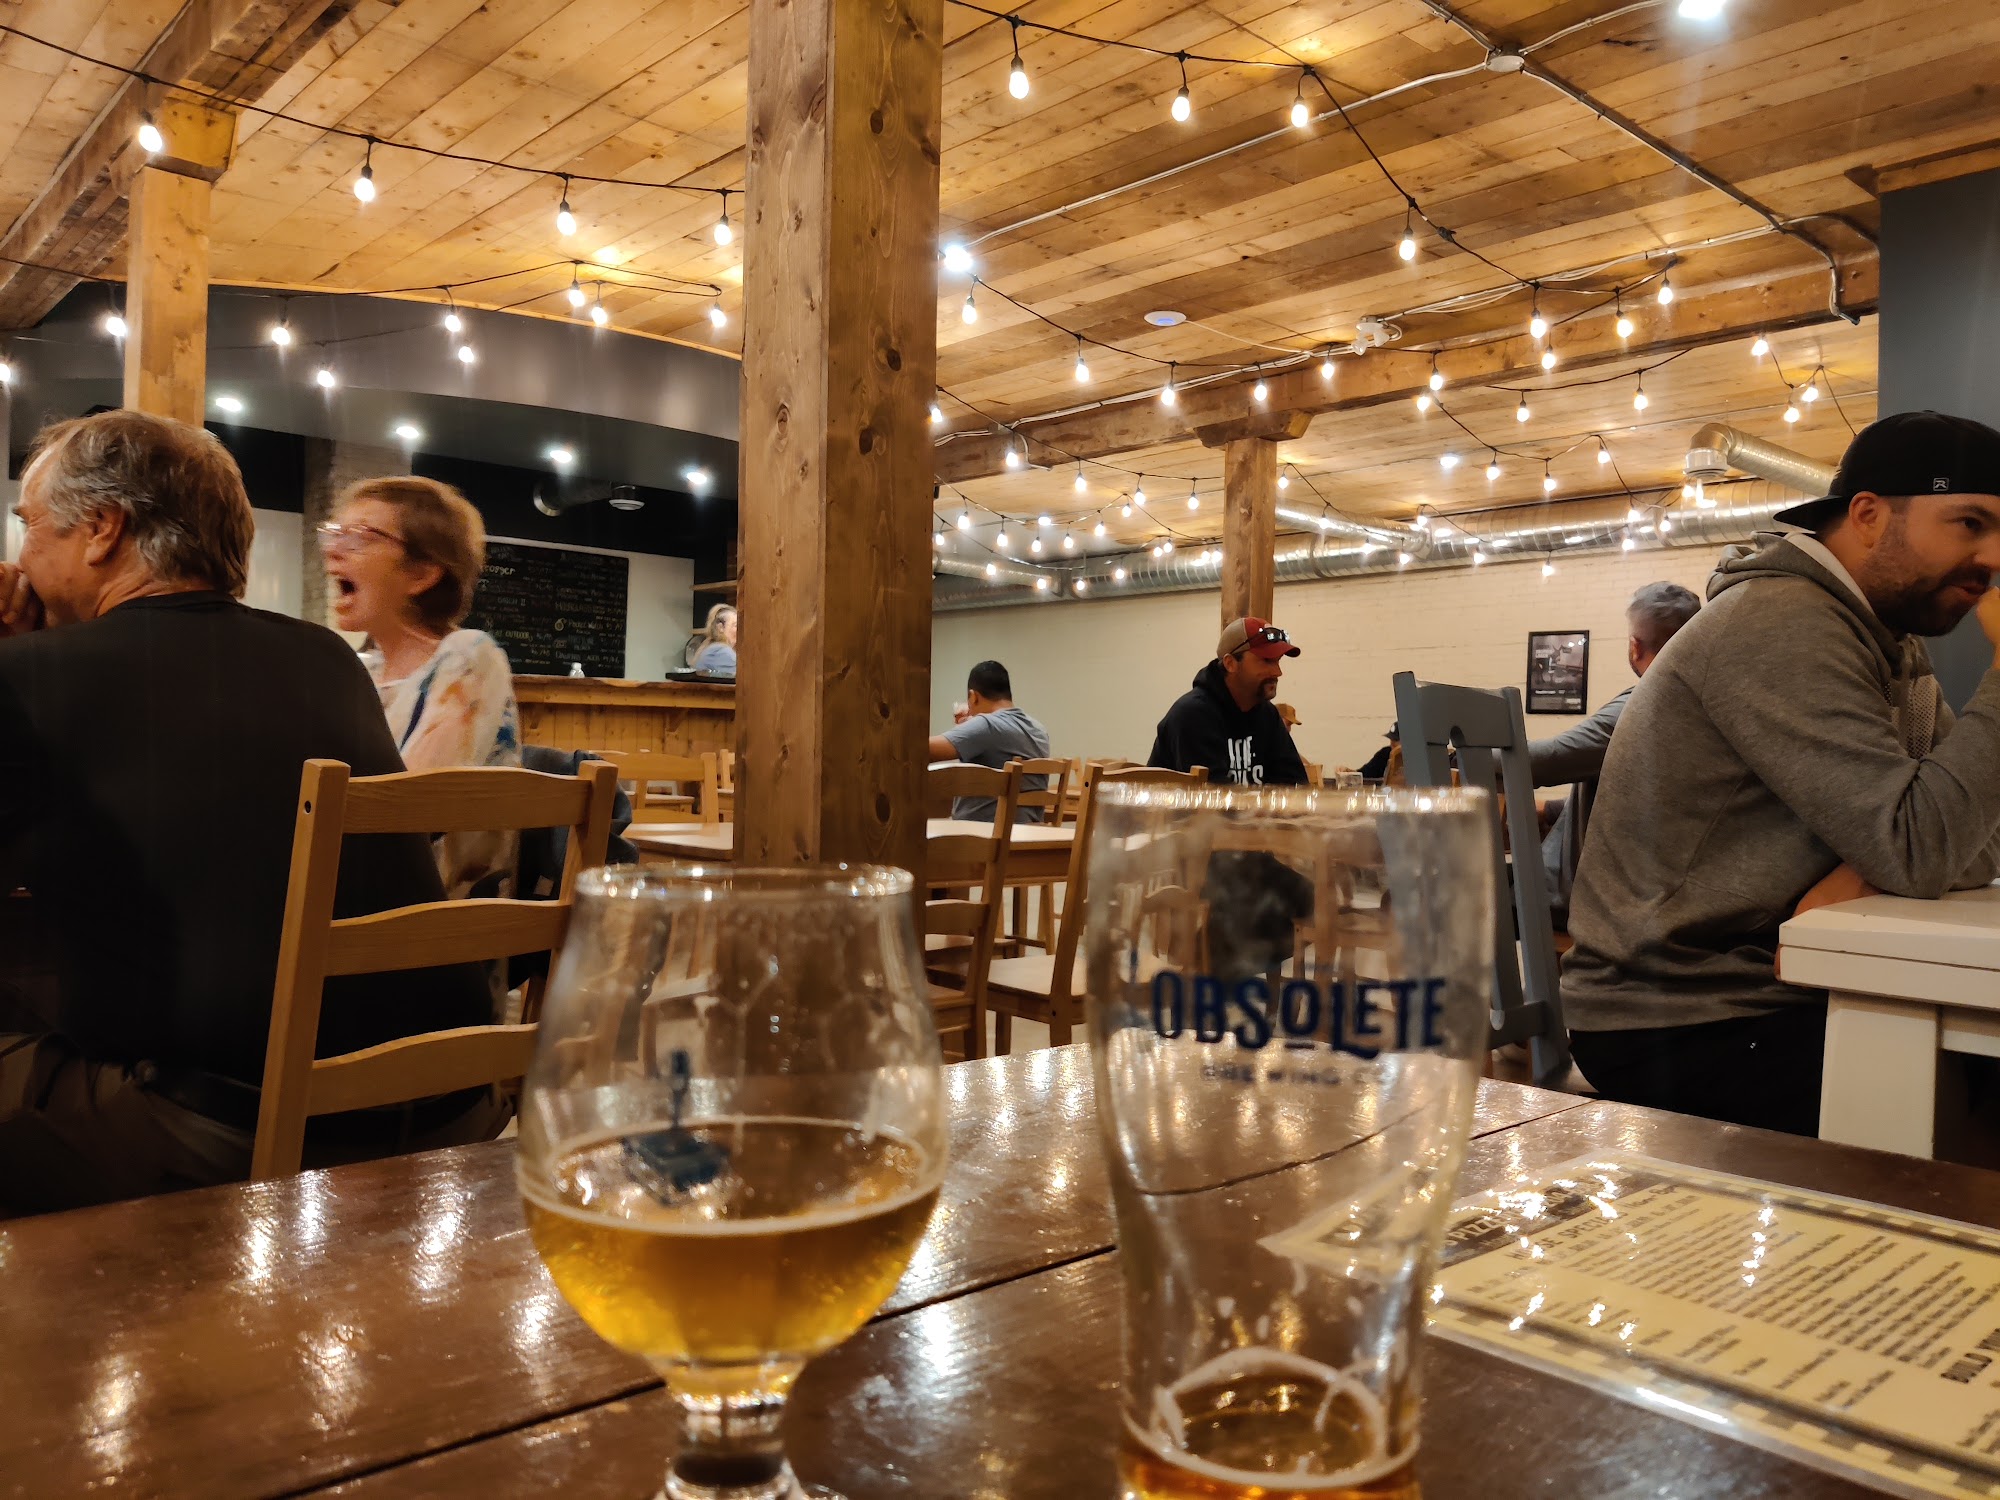 Obsolete Brewing Co 24 2 Ave NW, Dauphin, MB R7N 1H2